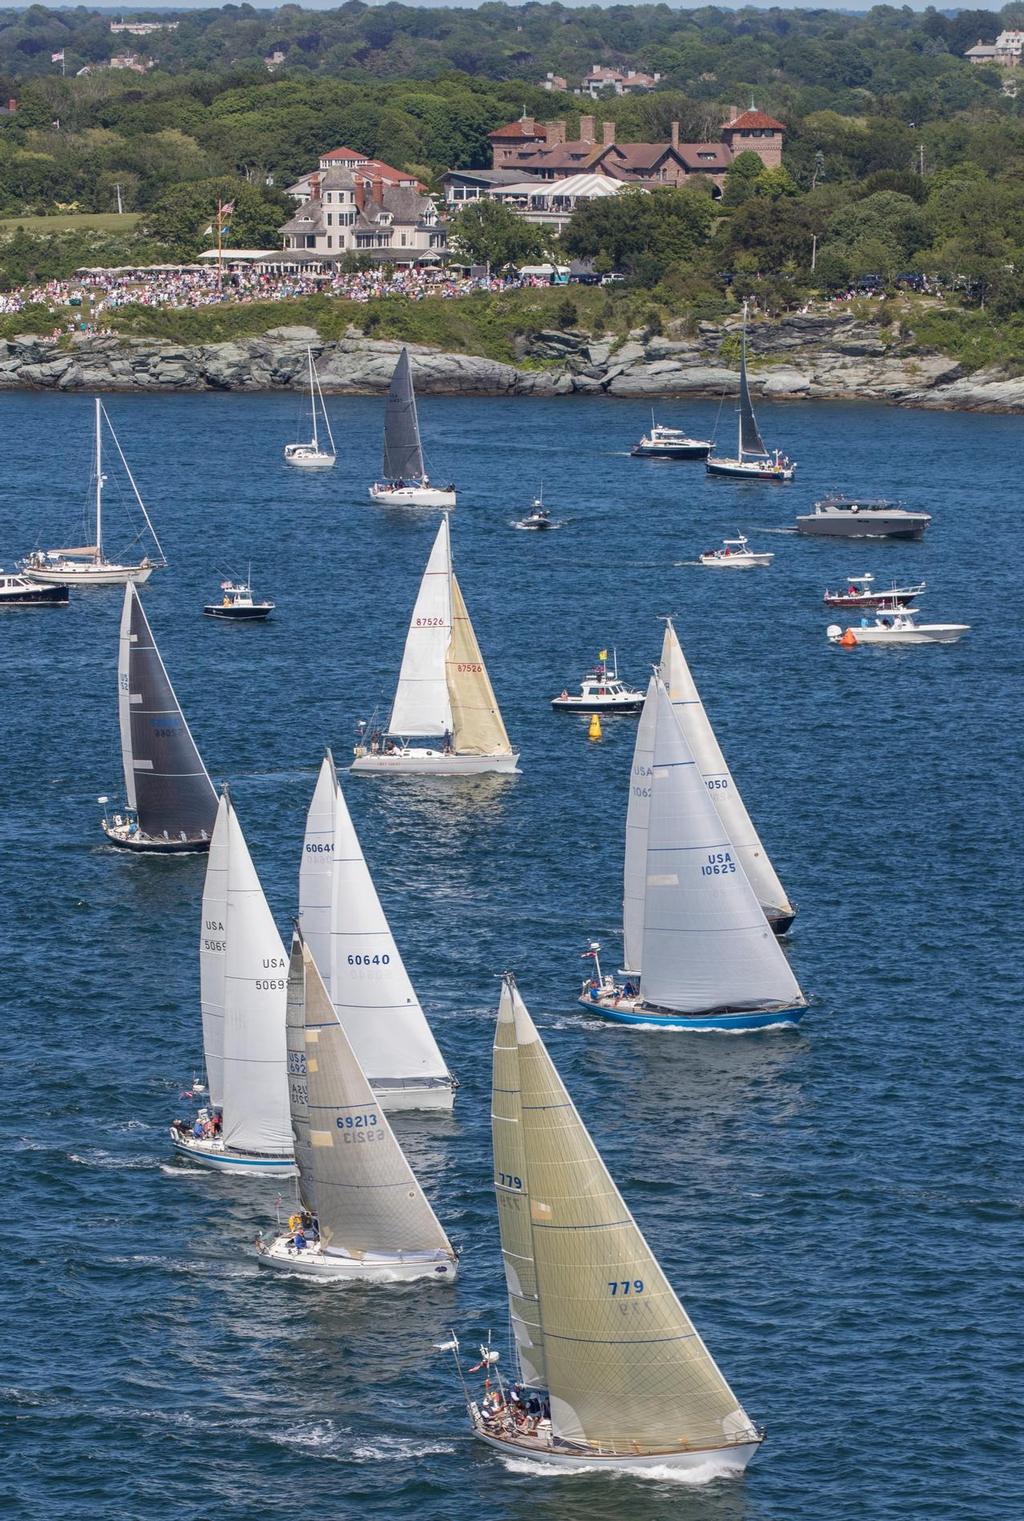 2016 Newport Bermuda Yacht Race start. Class 4 St David’s Lighthouse Trophy: 779 FROYA, (McCurdy & Rhodes 46 skippered by Briggs Tobin from Ridgefield CT) 2016 Newport Bermuda Yacht Race start.  ZIPPORAH USA 69213 skippered by Doug Mann from St Paul MN.<br />
MORGAN OF MARIETTA, USA 50692 skippered by Colin Golder  Centurion 42 from New Providence, NJ<br />
PERIGEE USA 6 © Daniel Forster / PPL